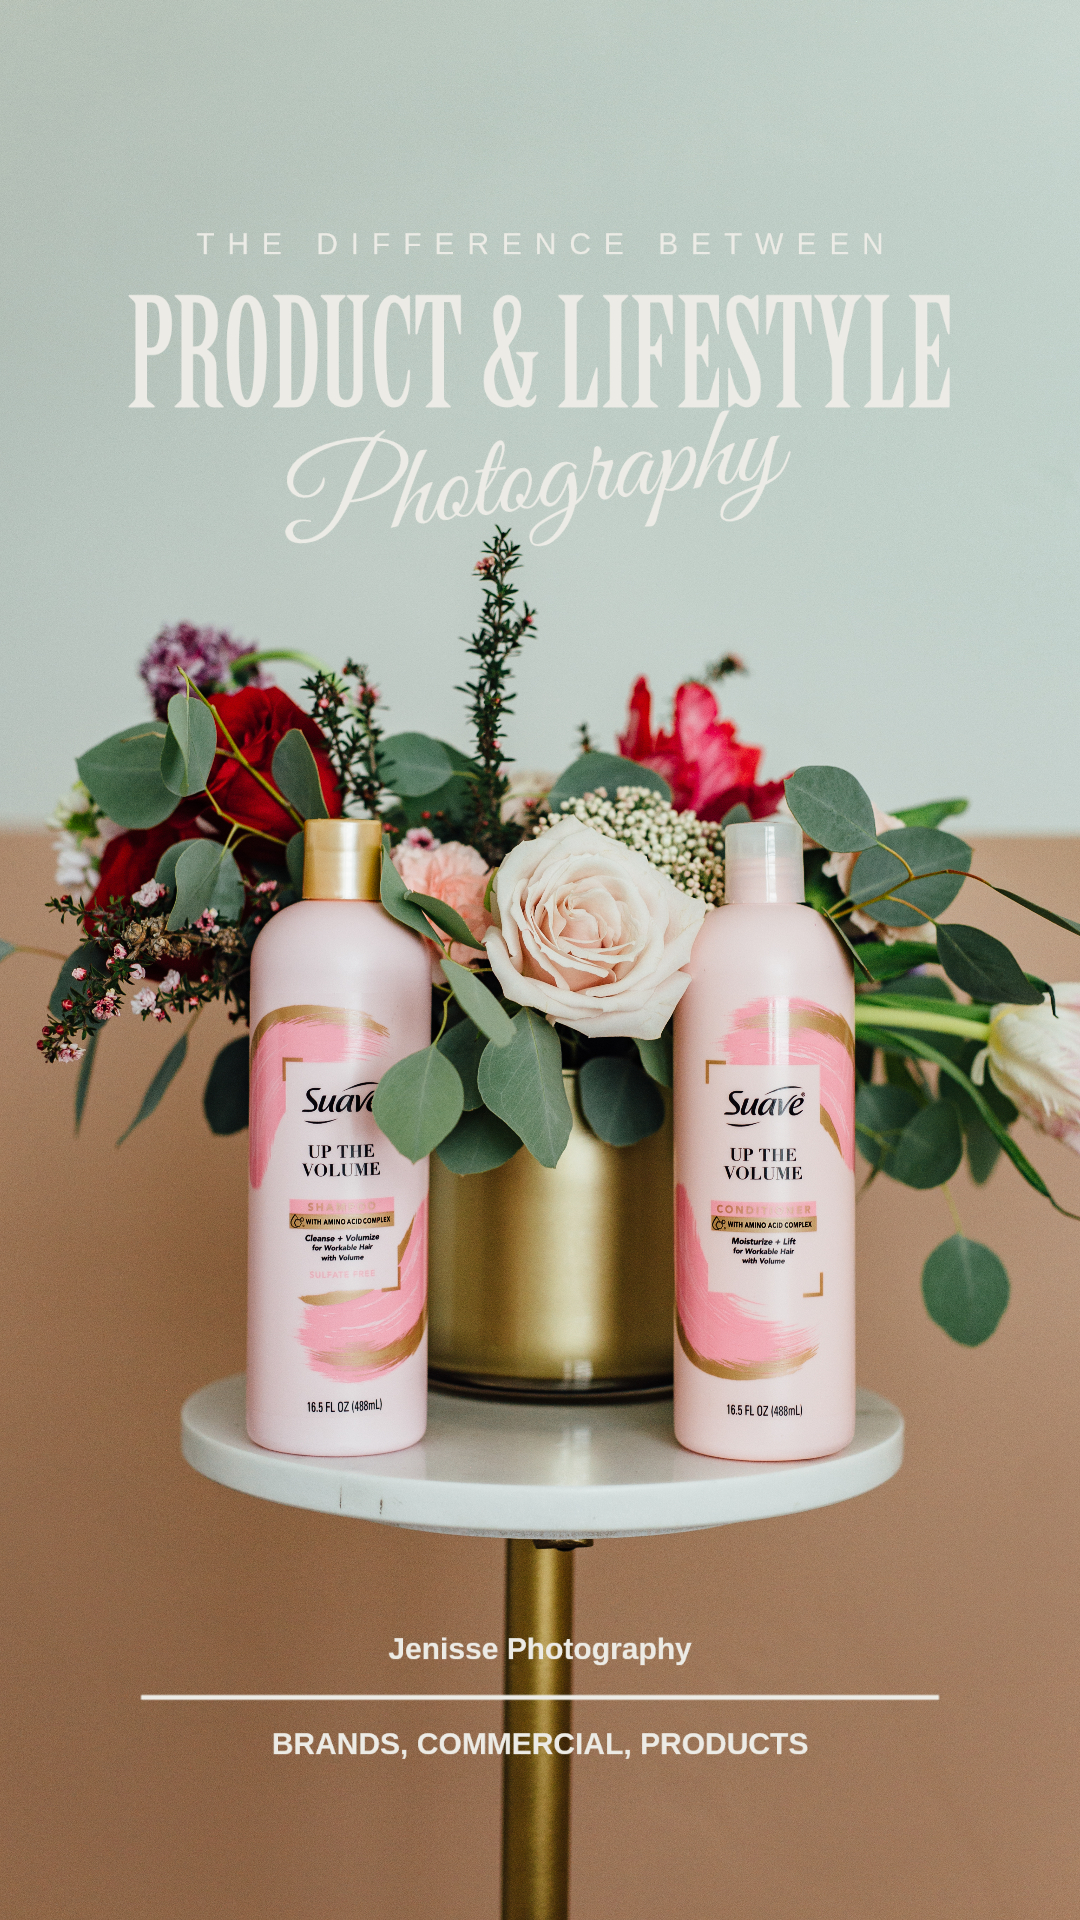 What is the difference between Lifestyle and Product Photography